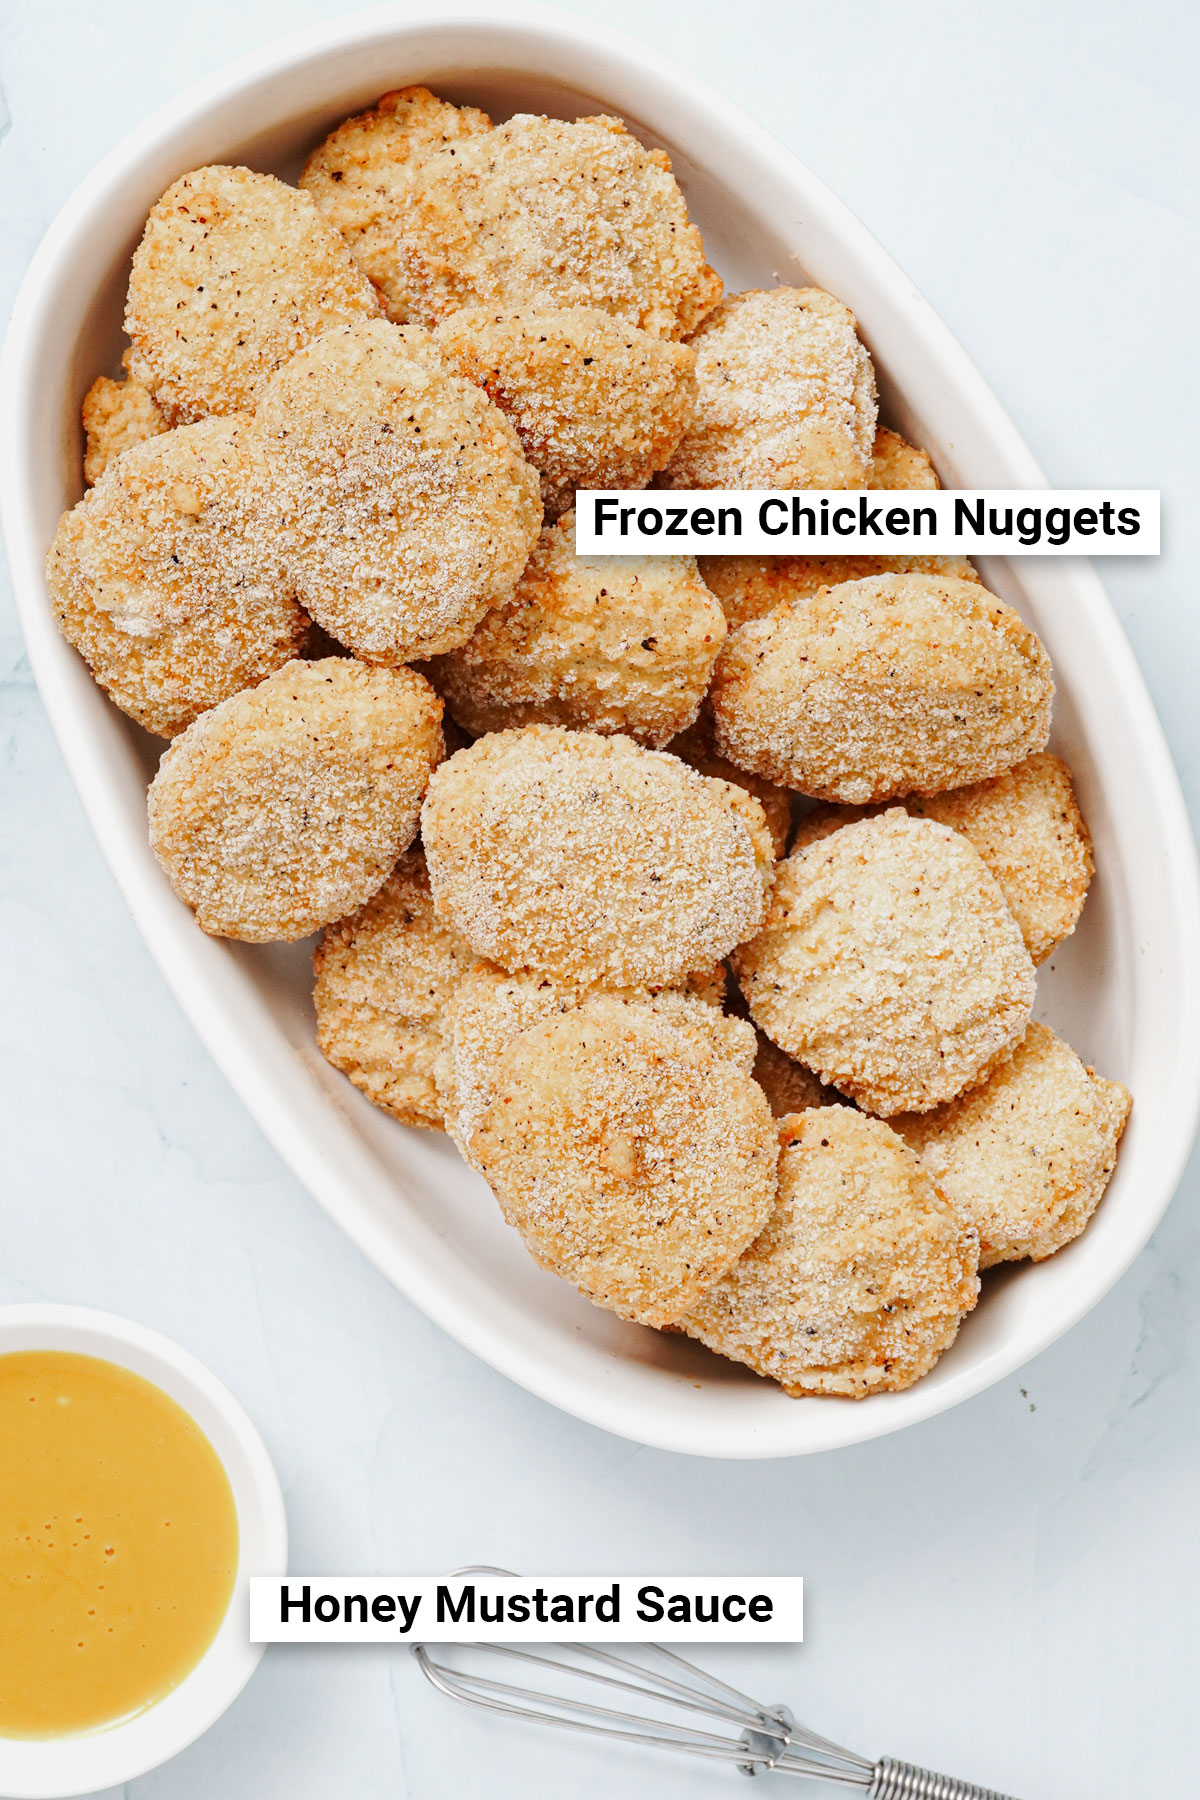 Uncooked frozen chicken nuggets with honey mustard dipping sauce, top view